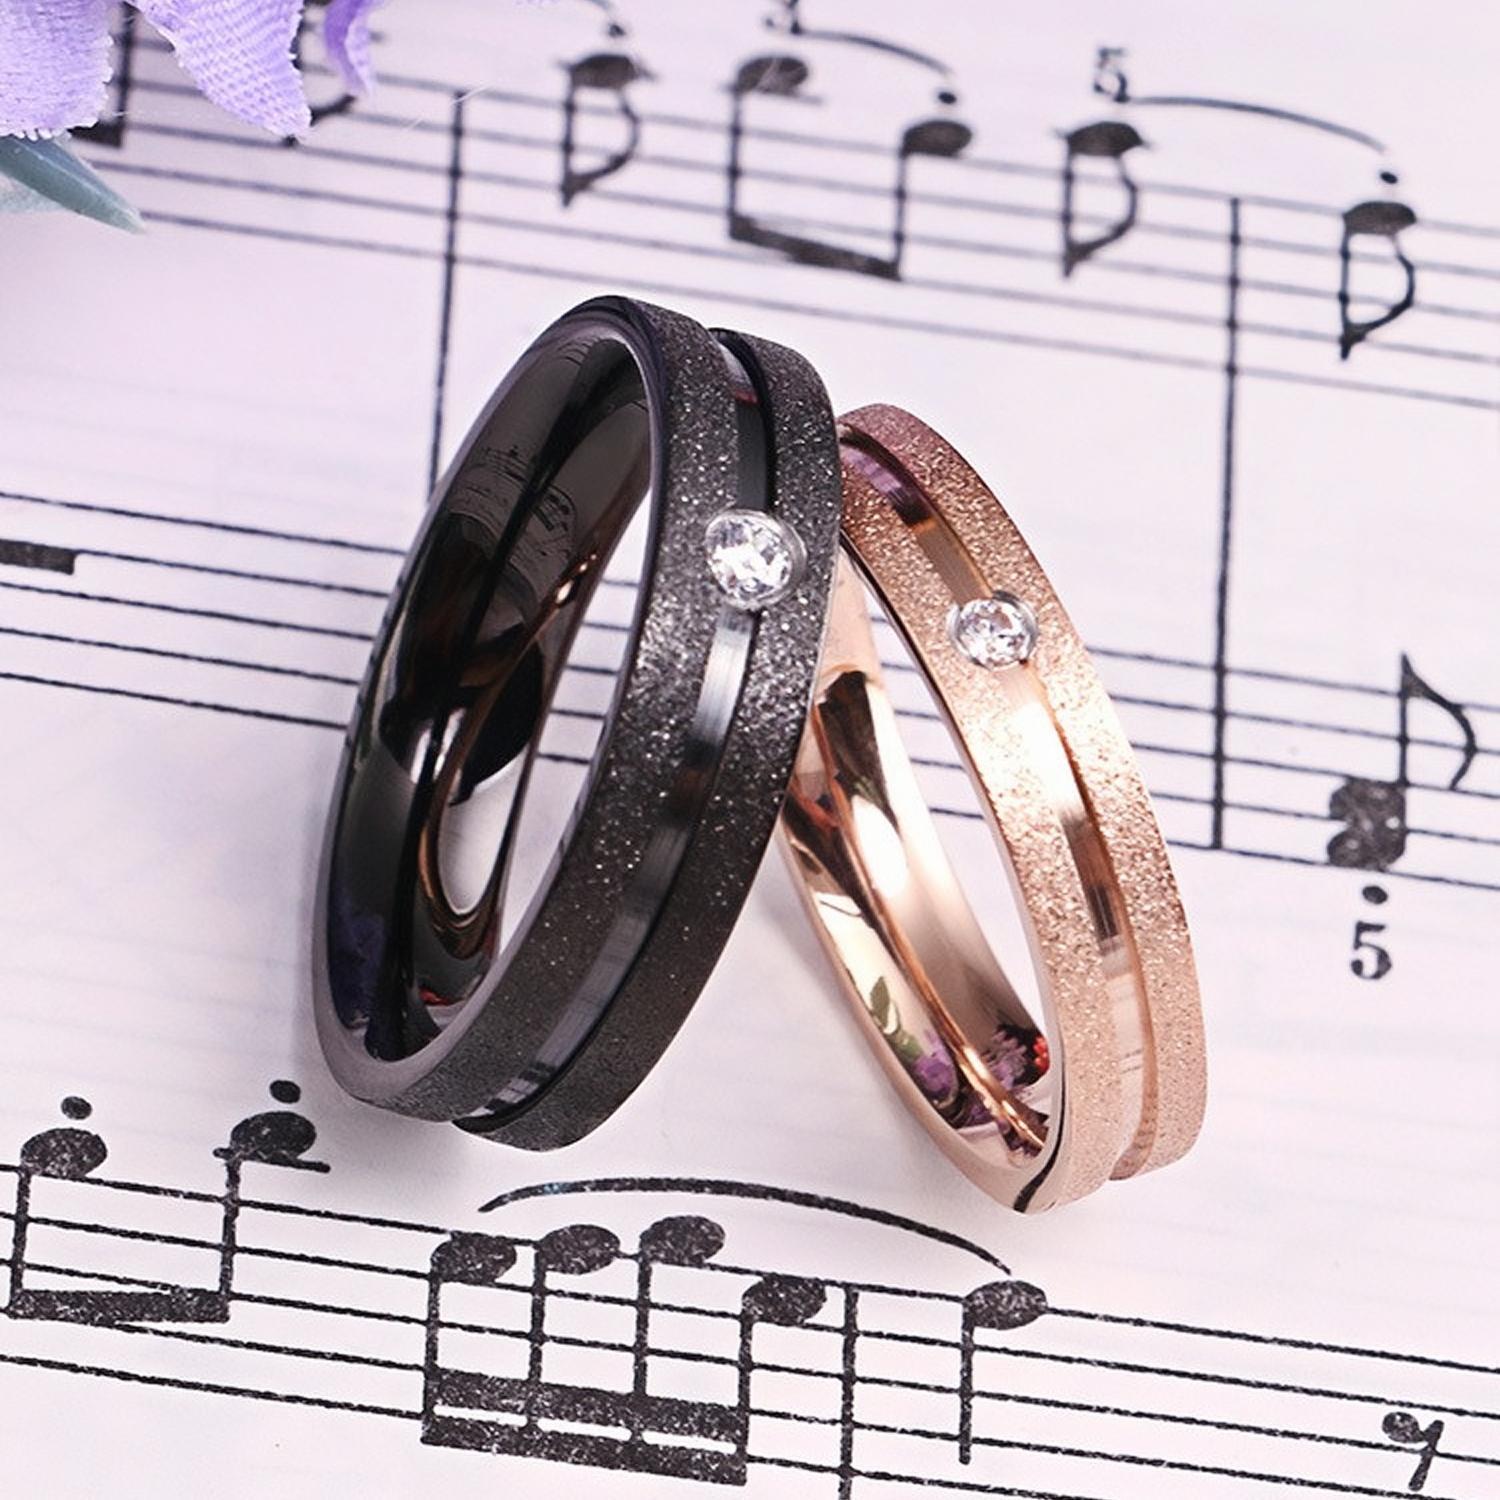 Engravable Simple Frosted Couple Rings Set In Titanium - CoupleSets